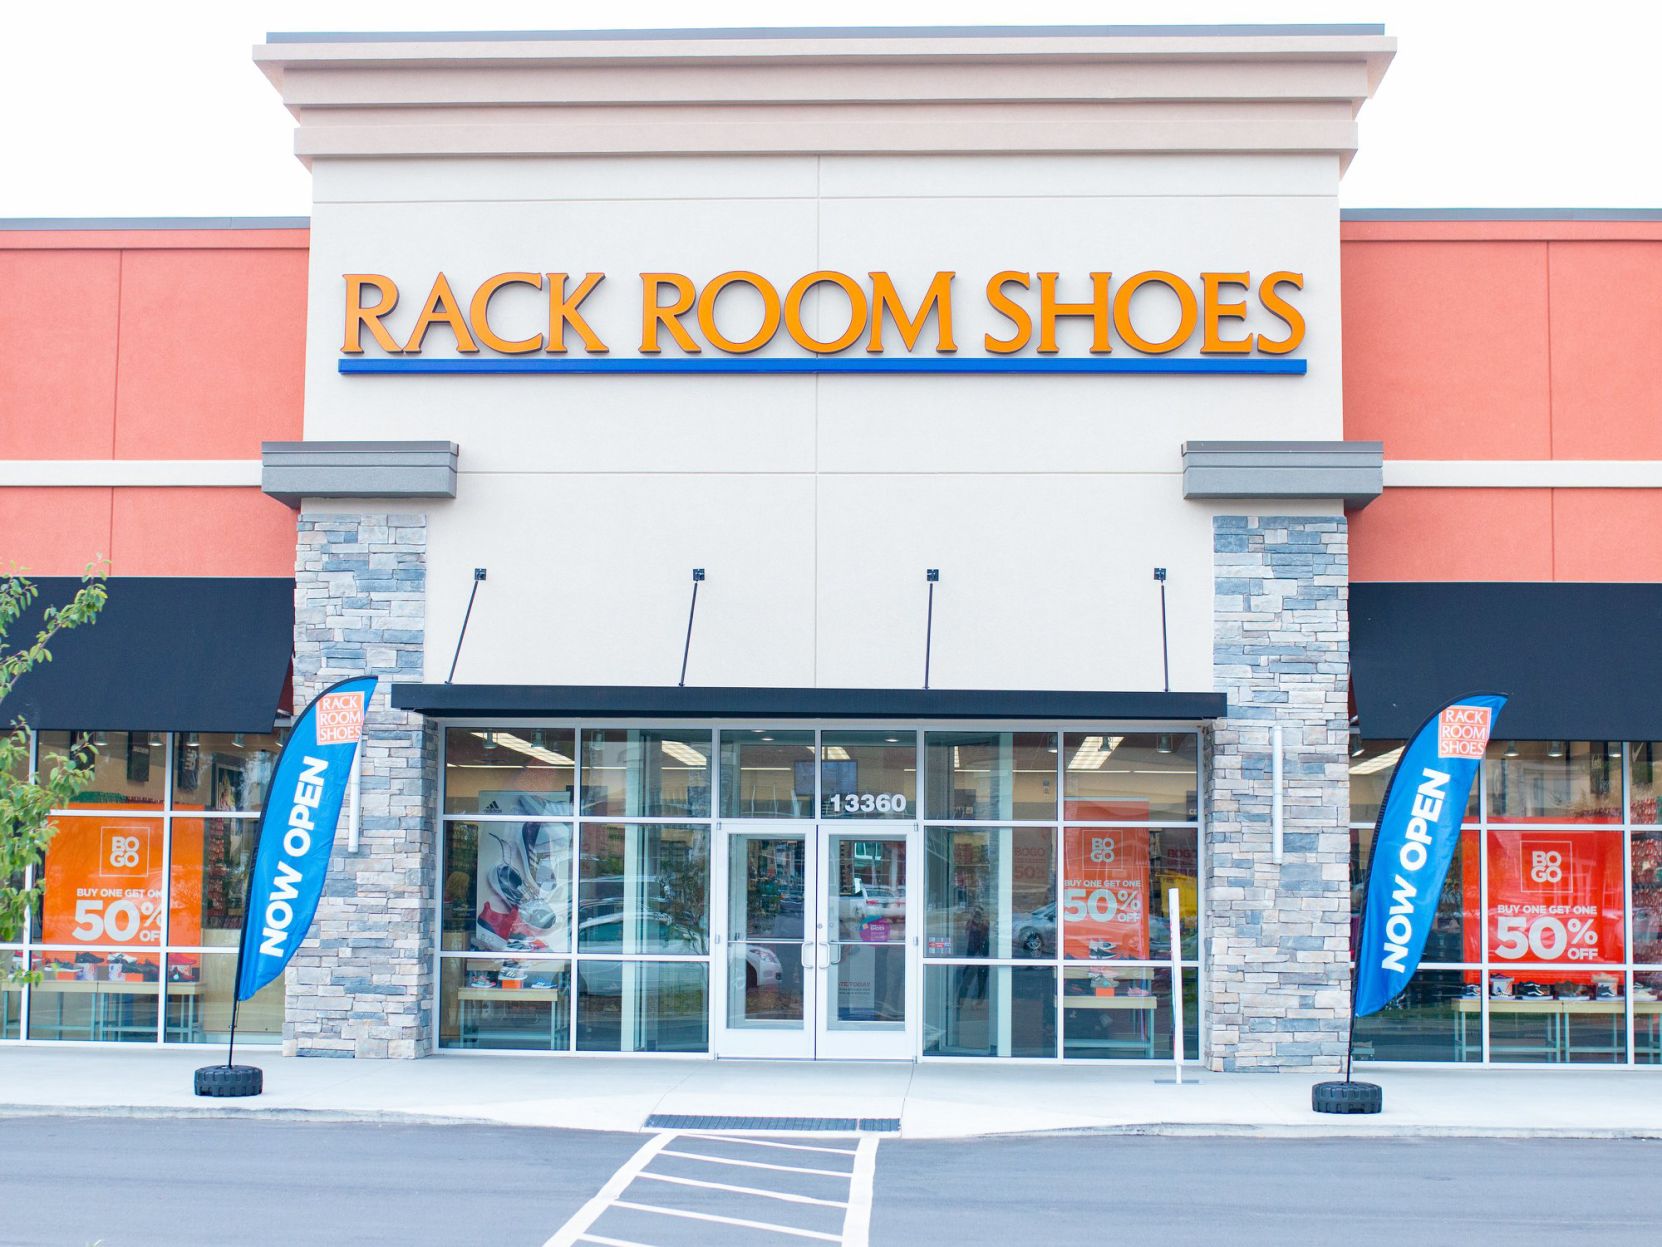 Rack Room Shoes will open store in 